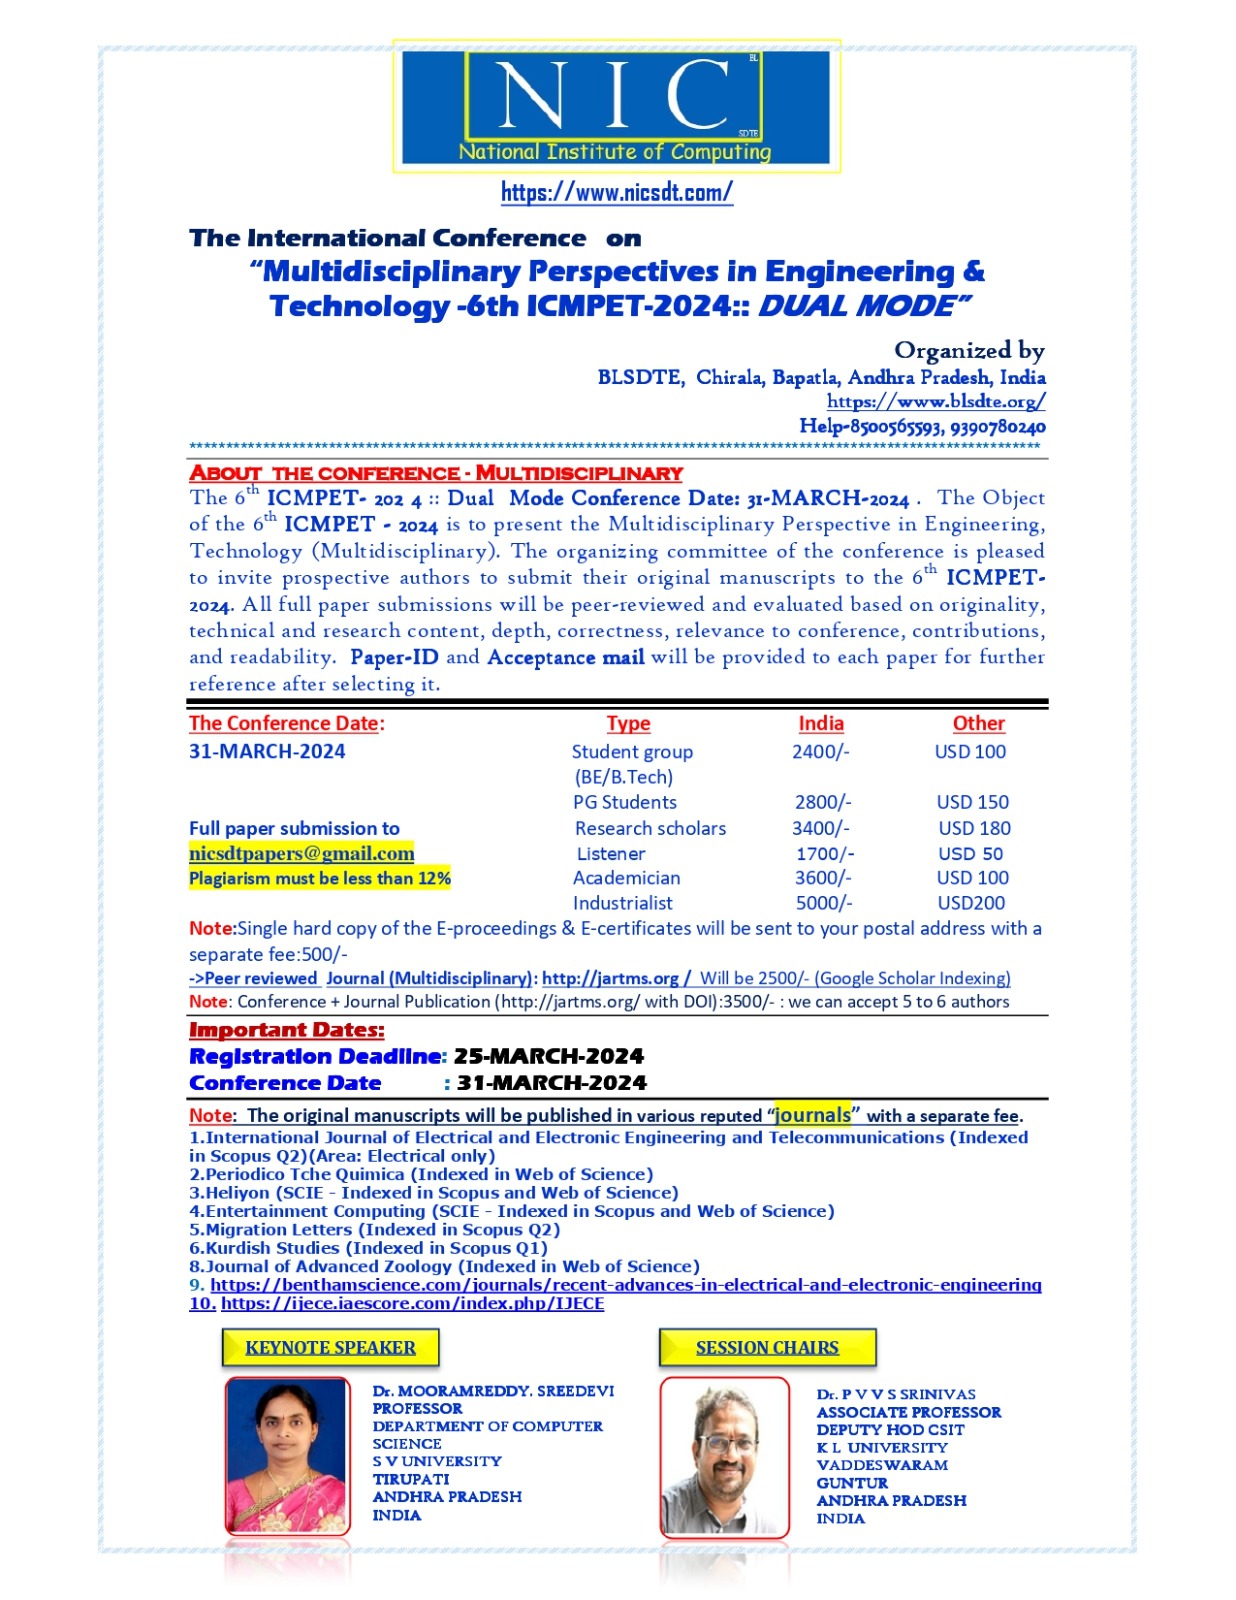 Multidisciplinary Perspectives in Engineering and Technology 6th ICMPET-2024:: DUAL MODE